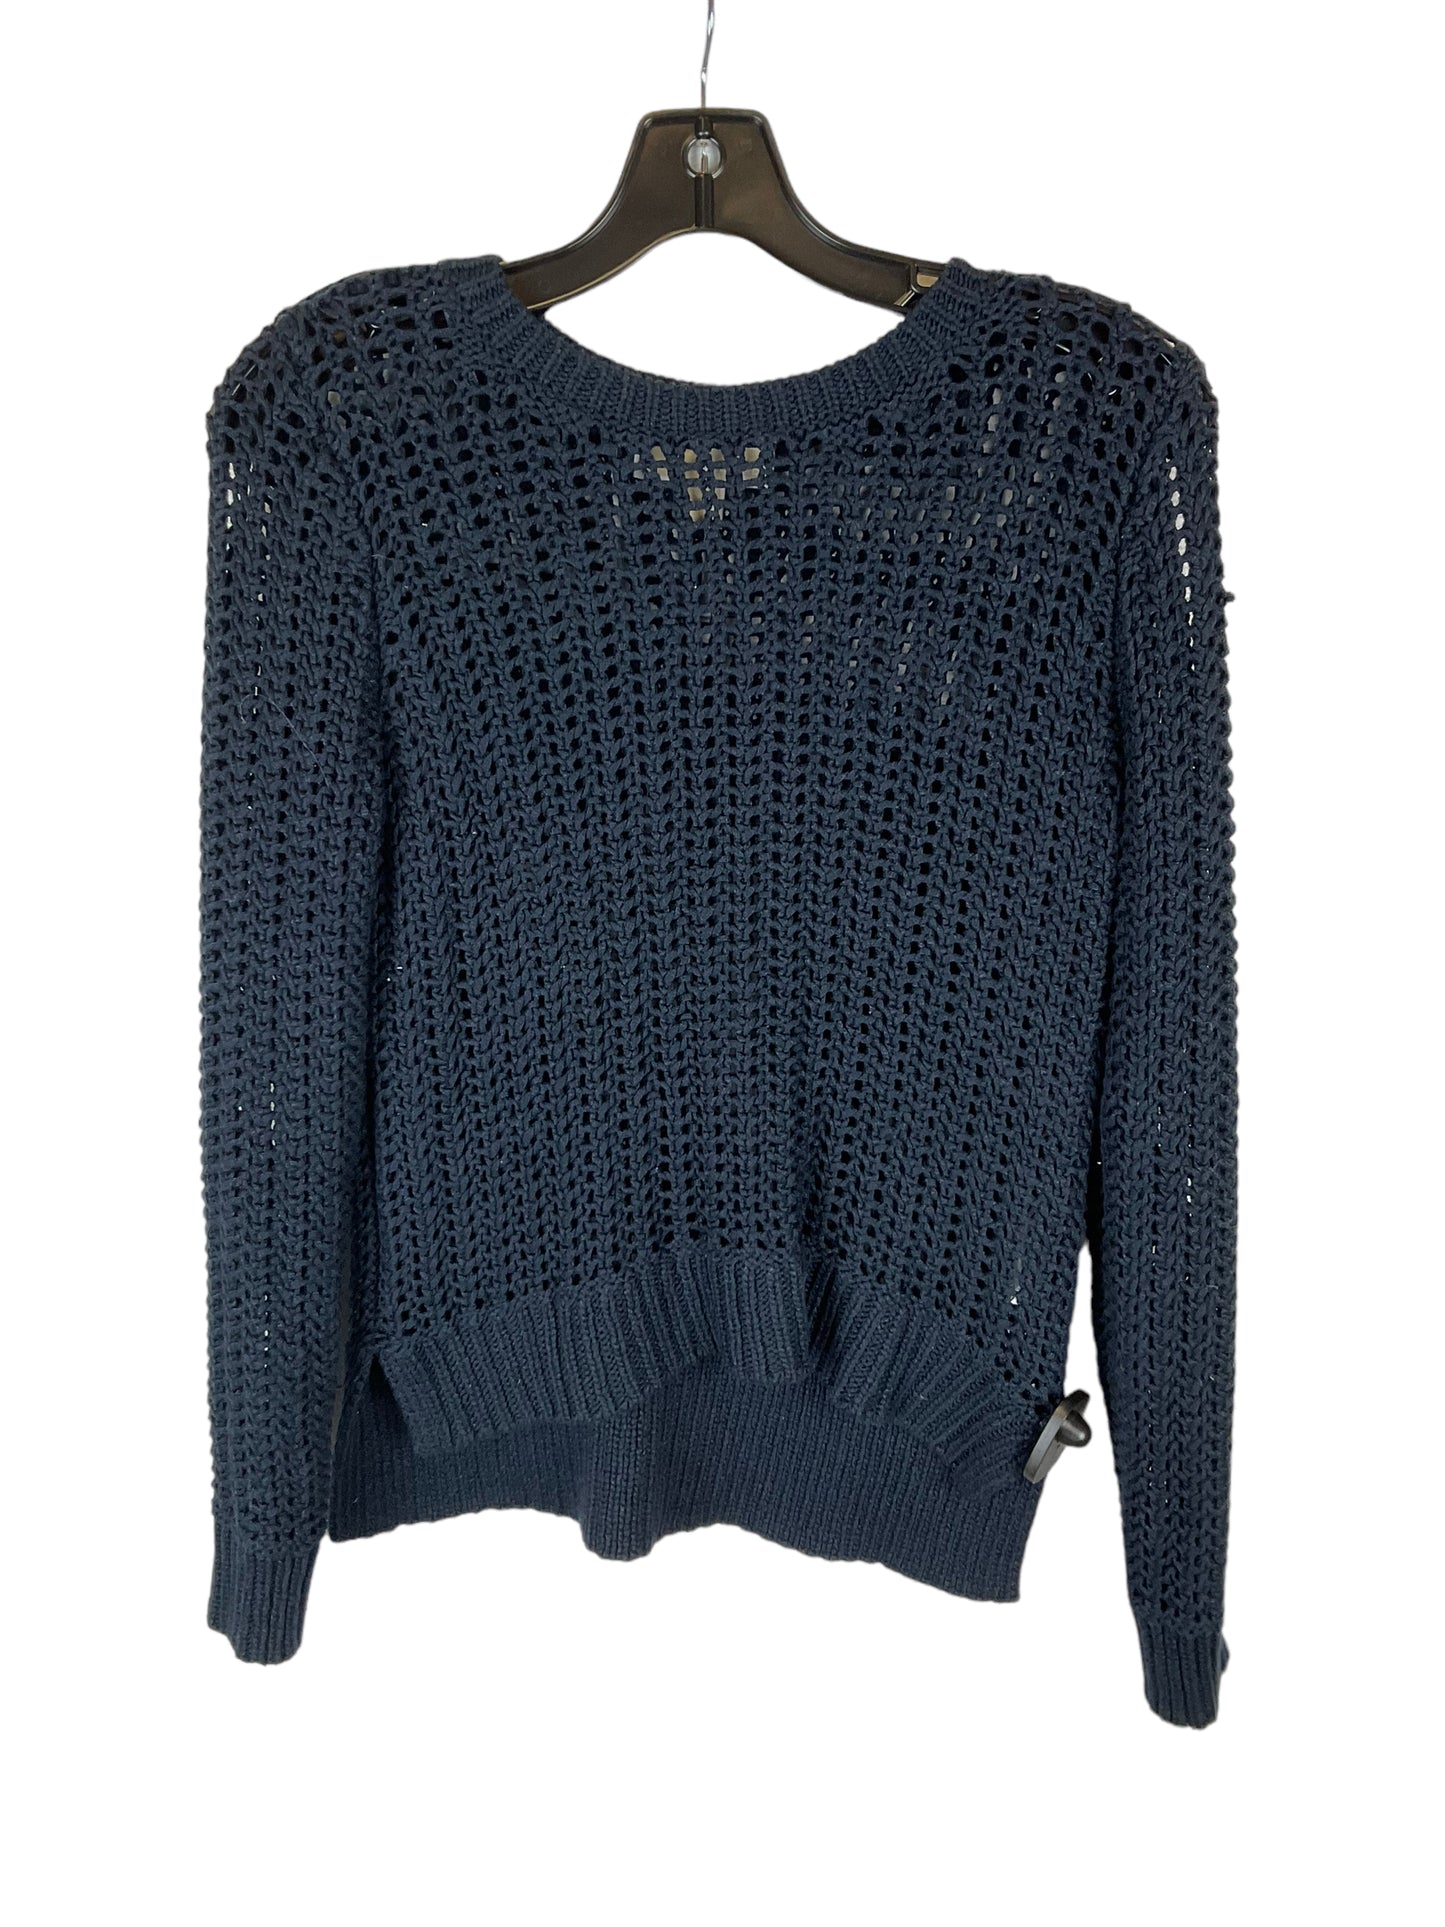 Sweater By Michael By Michael Kors  Size: S